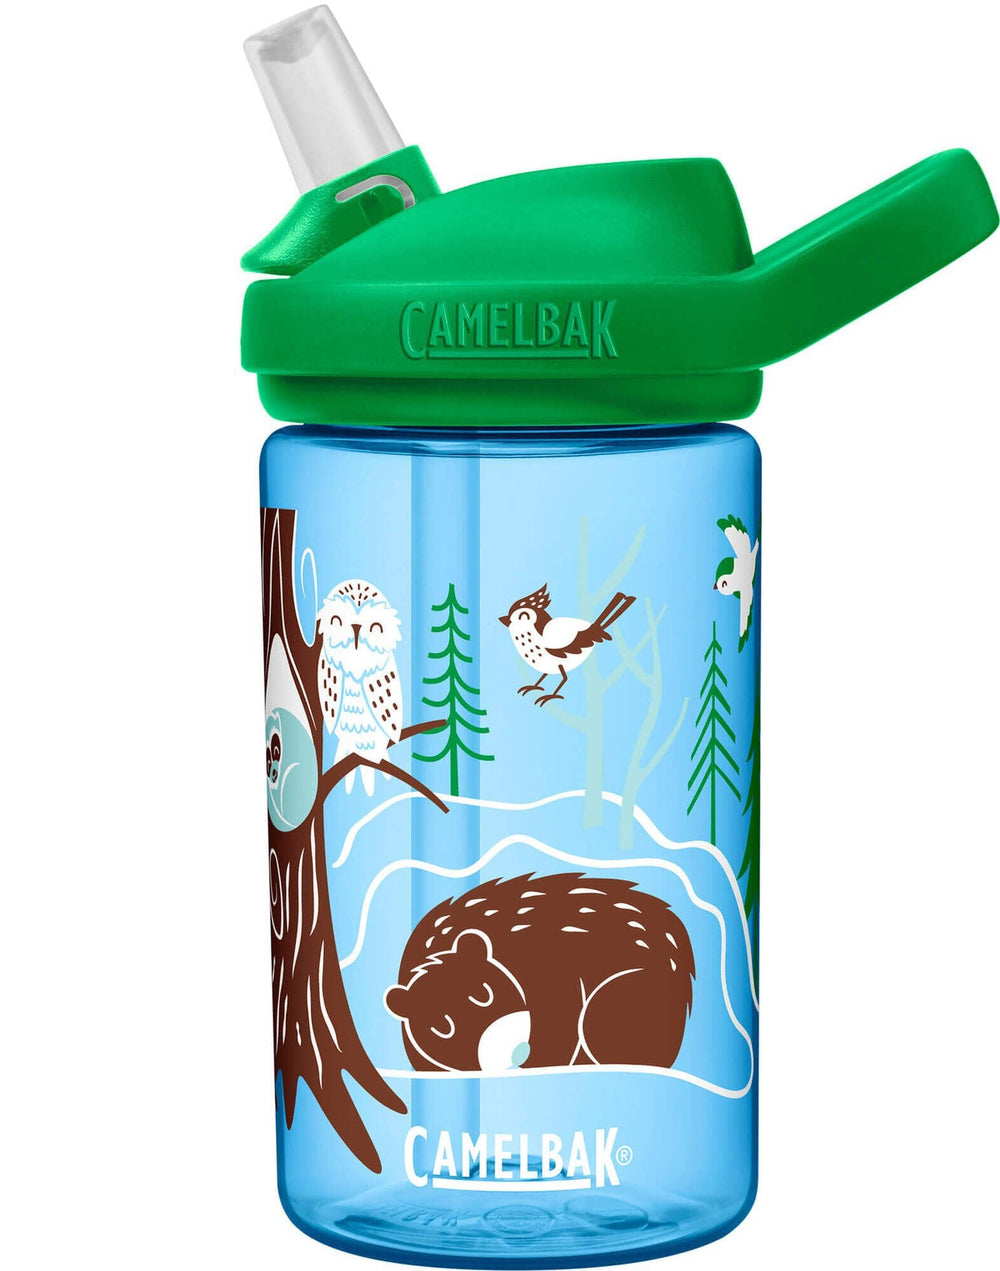 Kids Water Bottle With Straw Spill Proof Toddler Water Bottles For